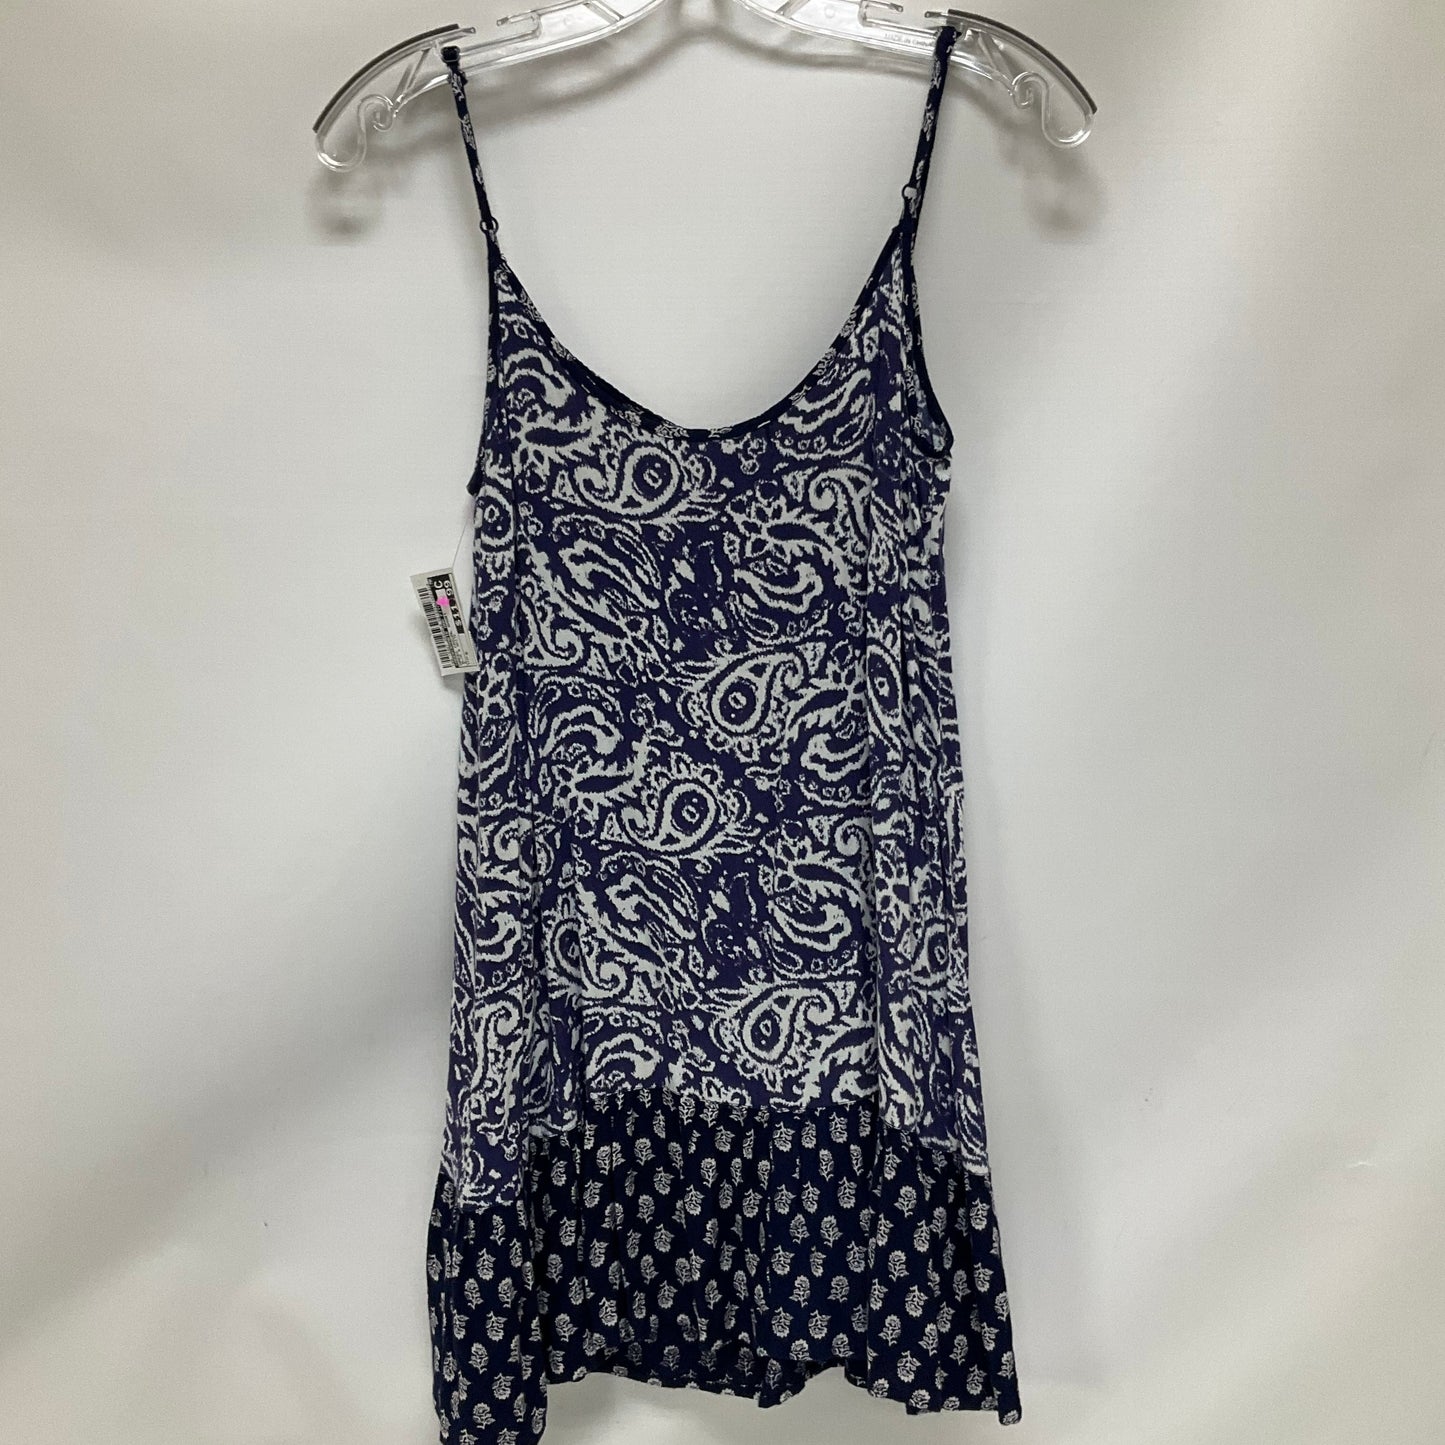 Dress Casual Short By Abercrombie And Fitch  Size: S